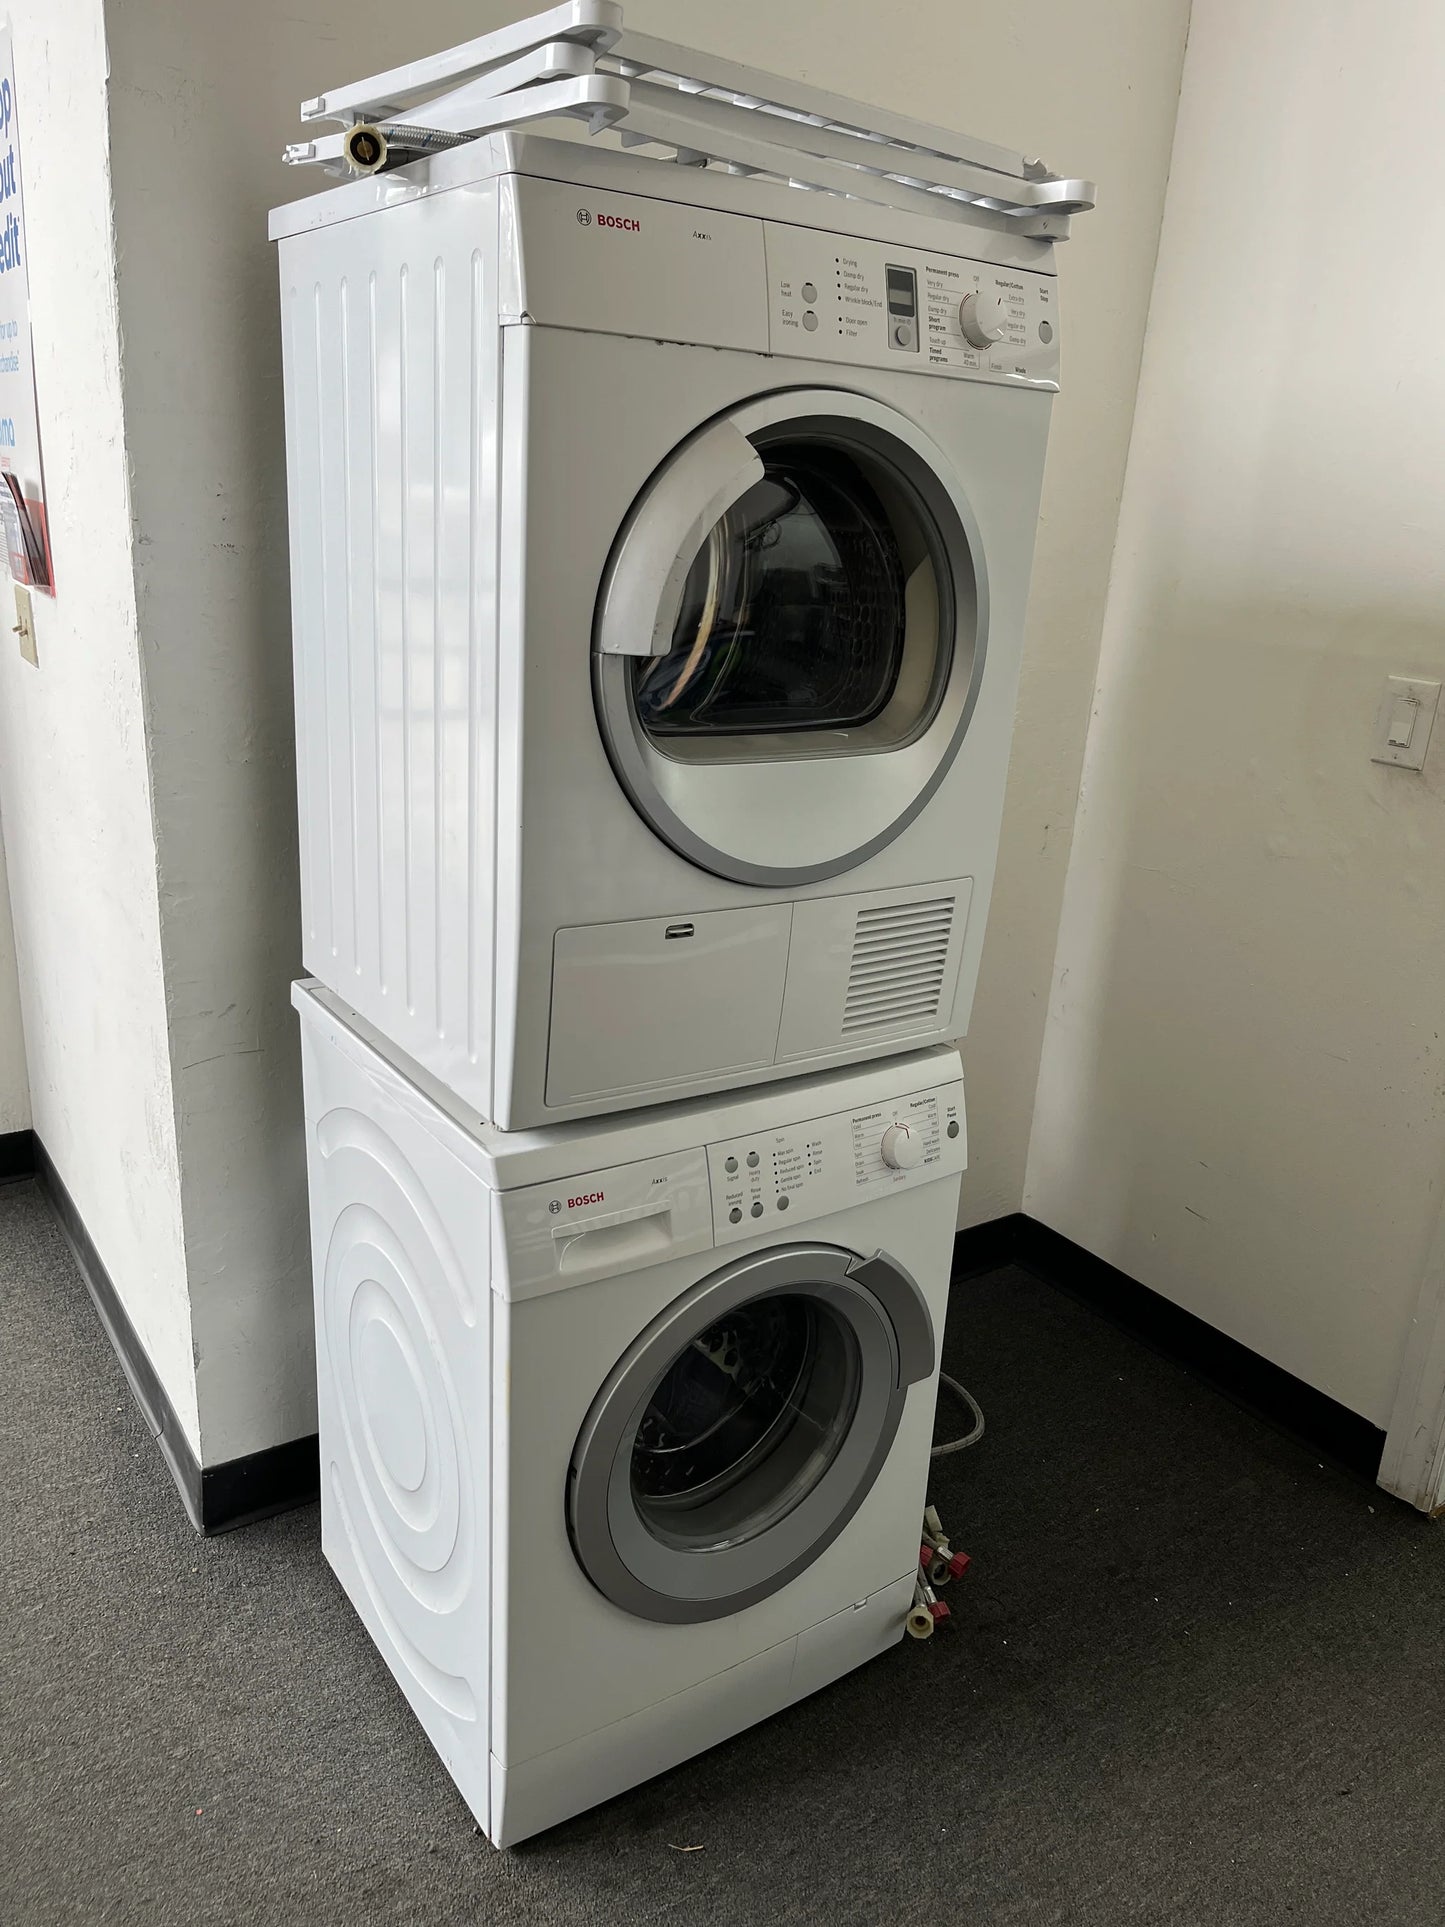 Bosch Axxis WAS20160UC 24 Inch Front-Load Washer 2.2 cu. ft., 15 Wash Programs, Touch Controls 1,000 RPM Spin Speed, Bosch Axxis WTE86300US 24 Inch Ventless Electric Dryer with 3.9 cu. ft., 11 Drying Cycles, 4 Drying Options, LED Anticrease , 369296